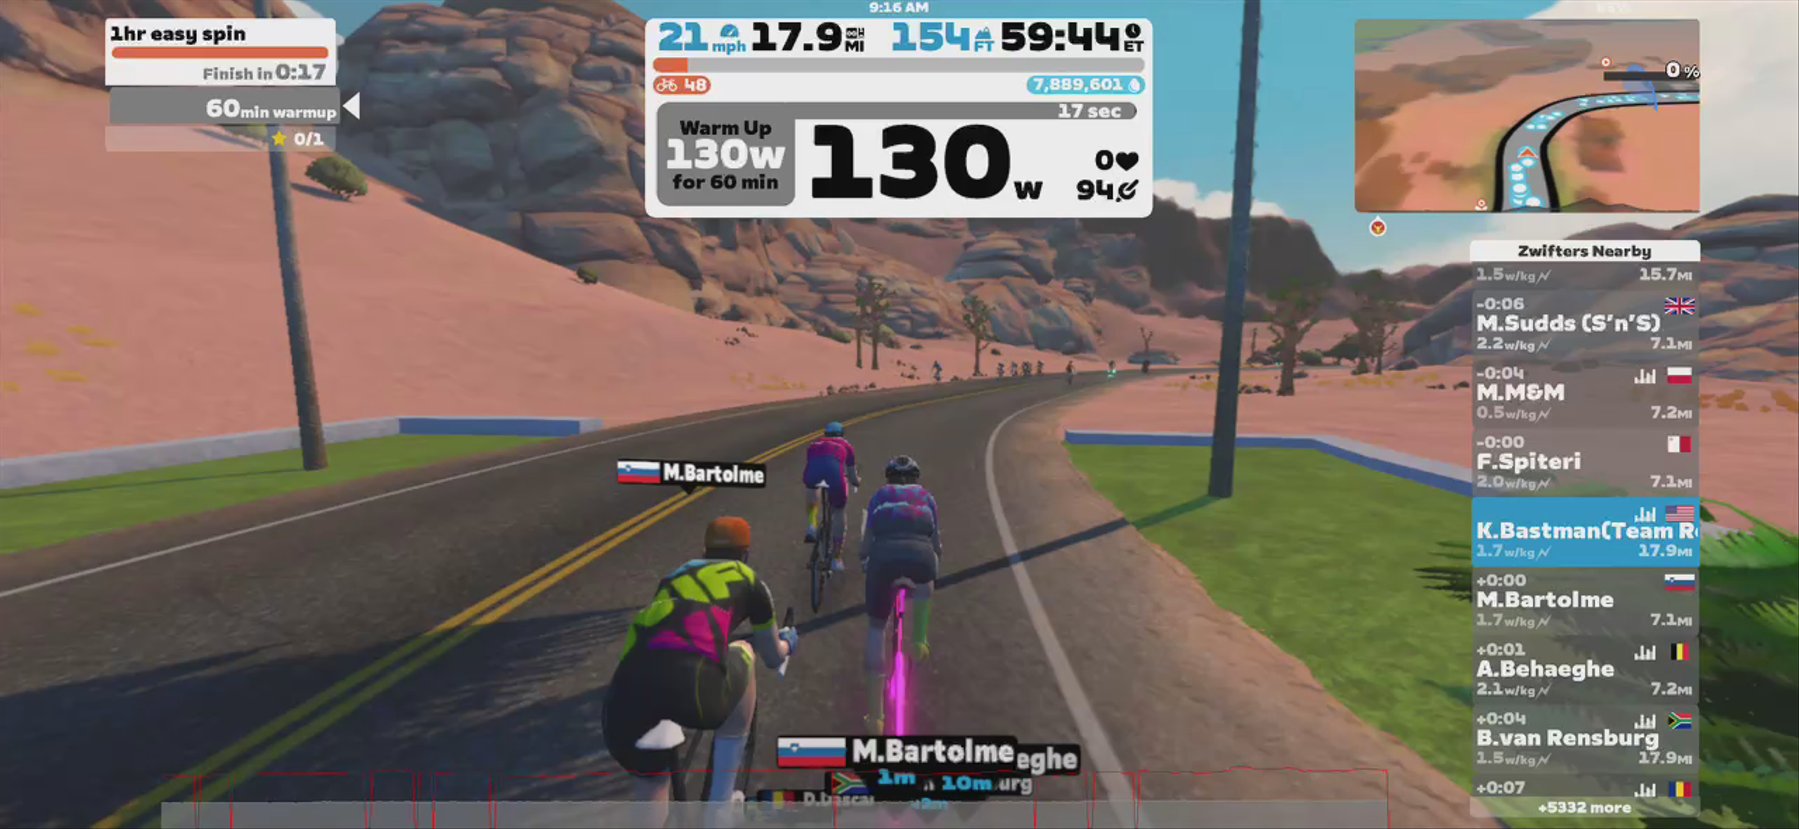 Zwift - 1hr easy spin in Watopia